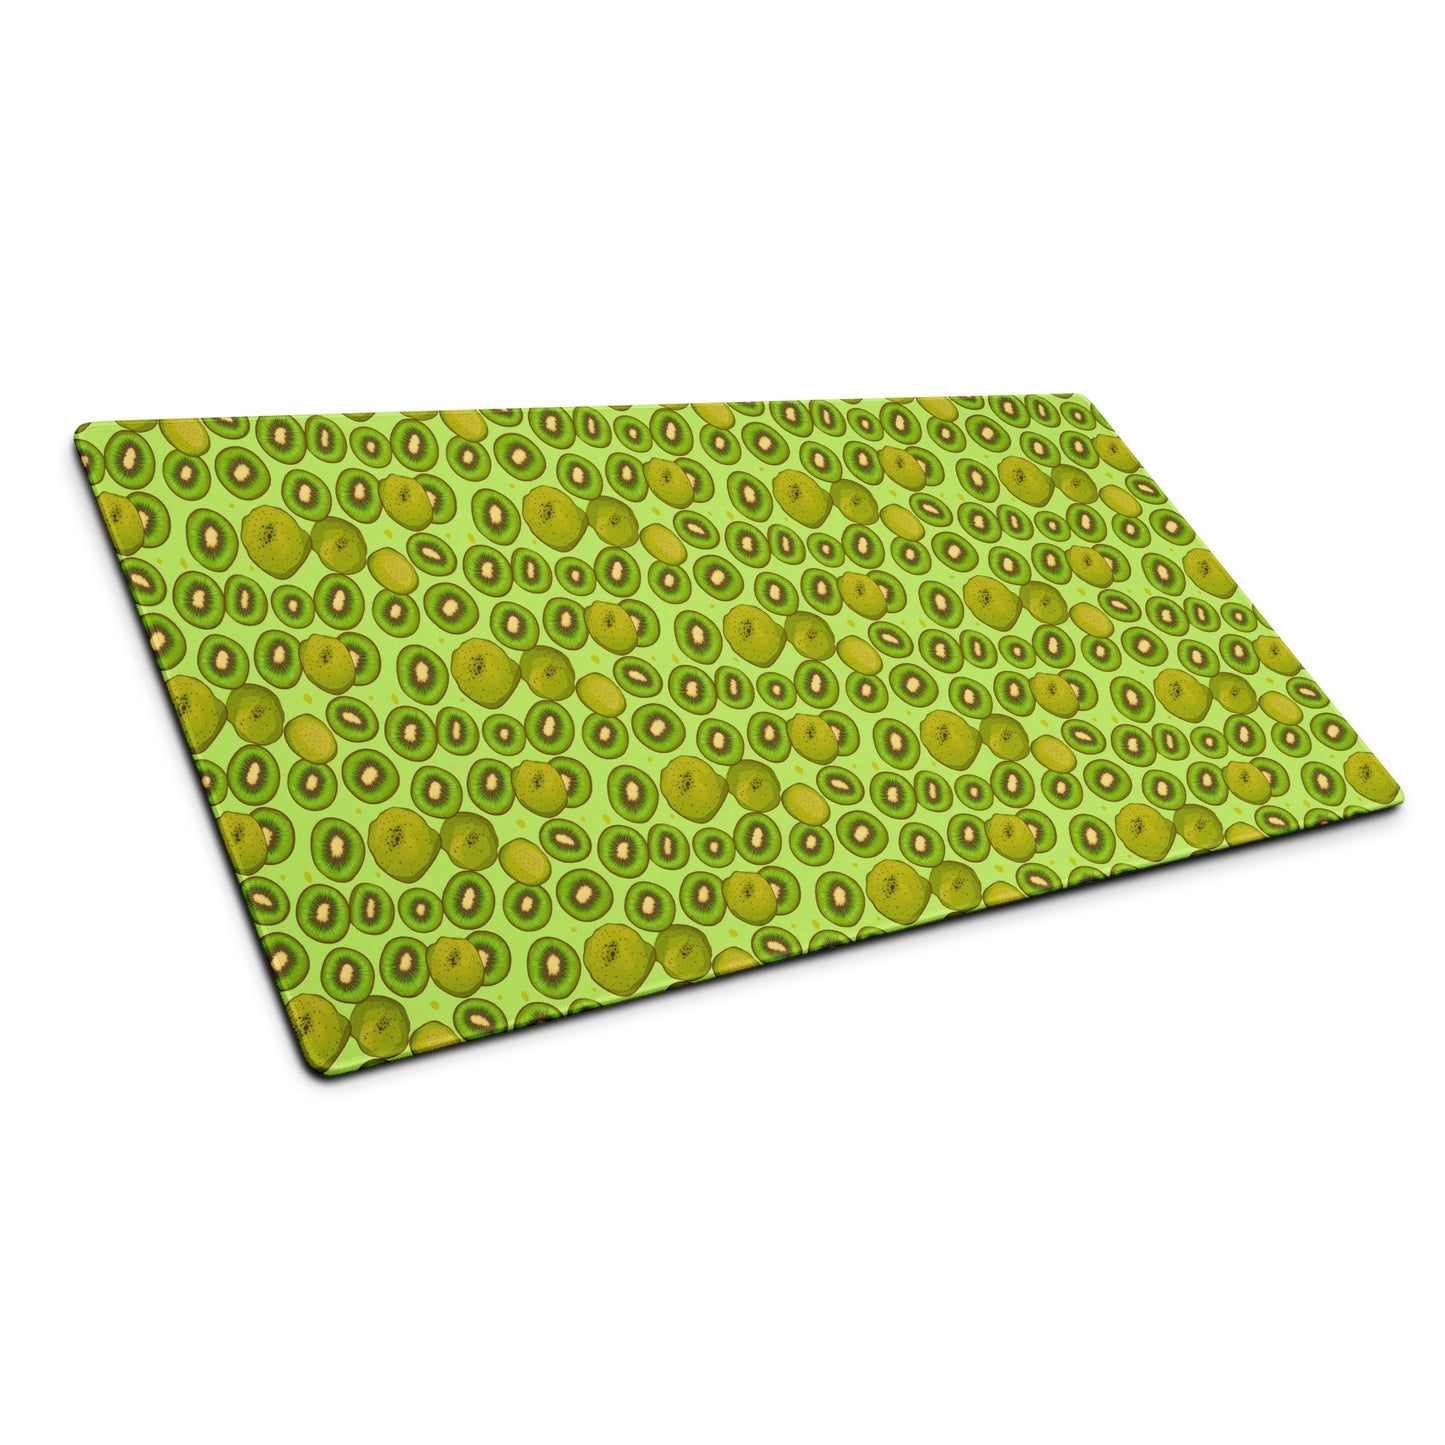 A 36" x 18" desk pad with Kiwis all over it shown at an angle. Green in color.